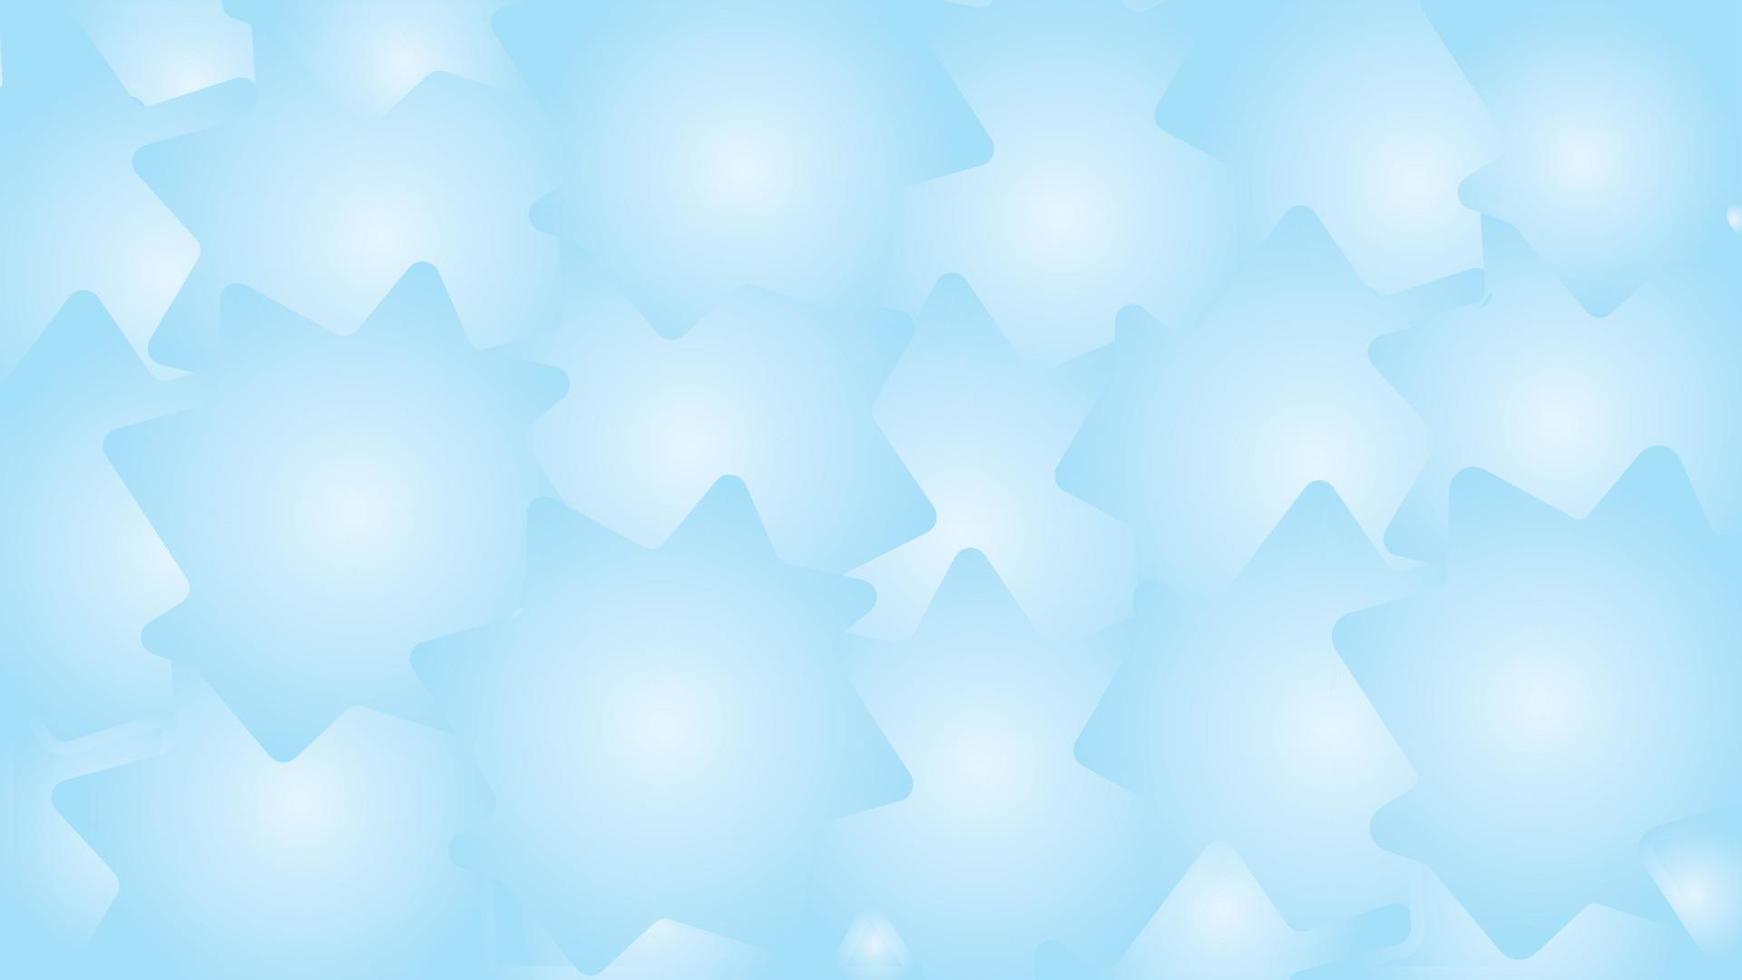 abstract blue background with stars, aqua blue soft texture gradient background vector